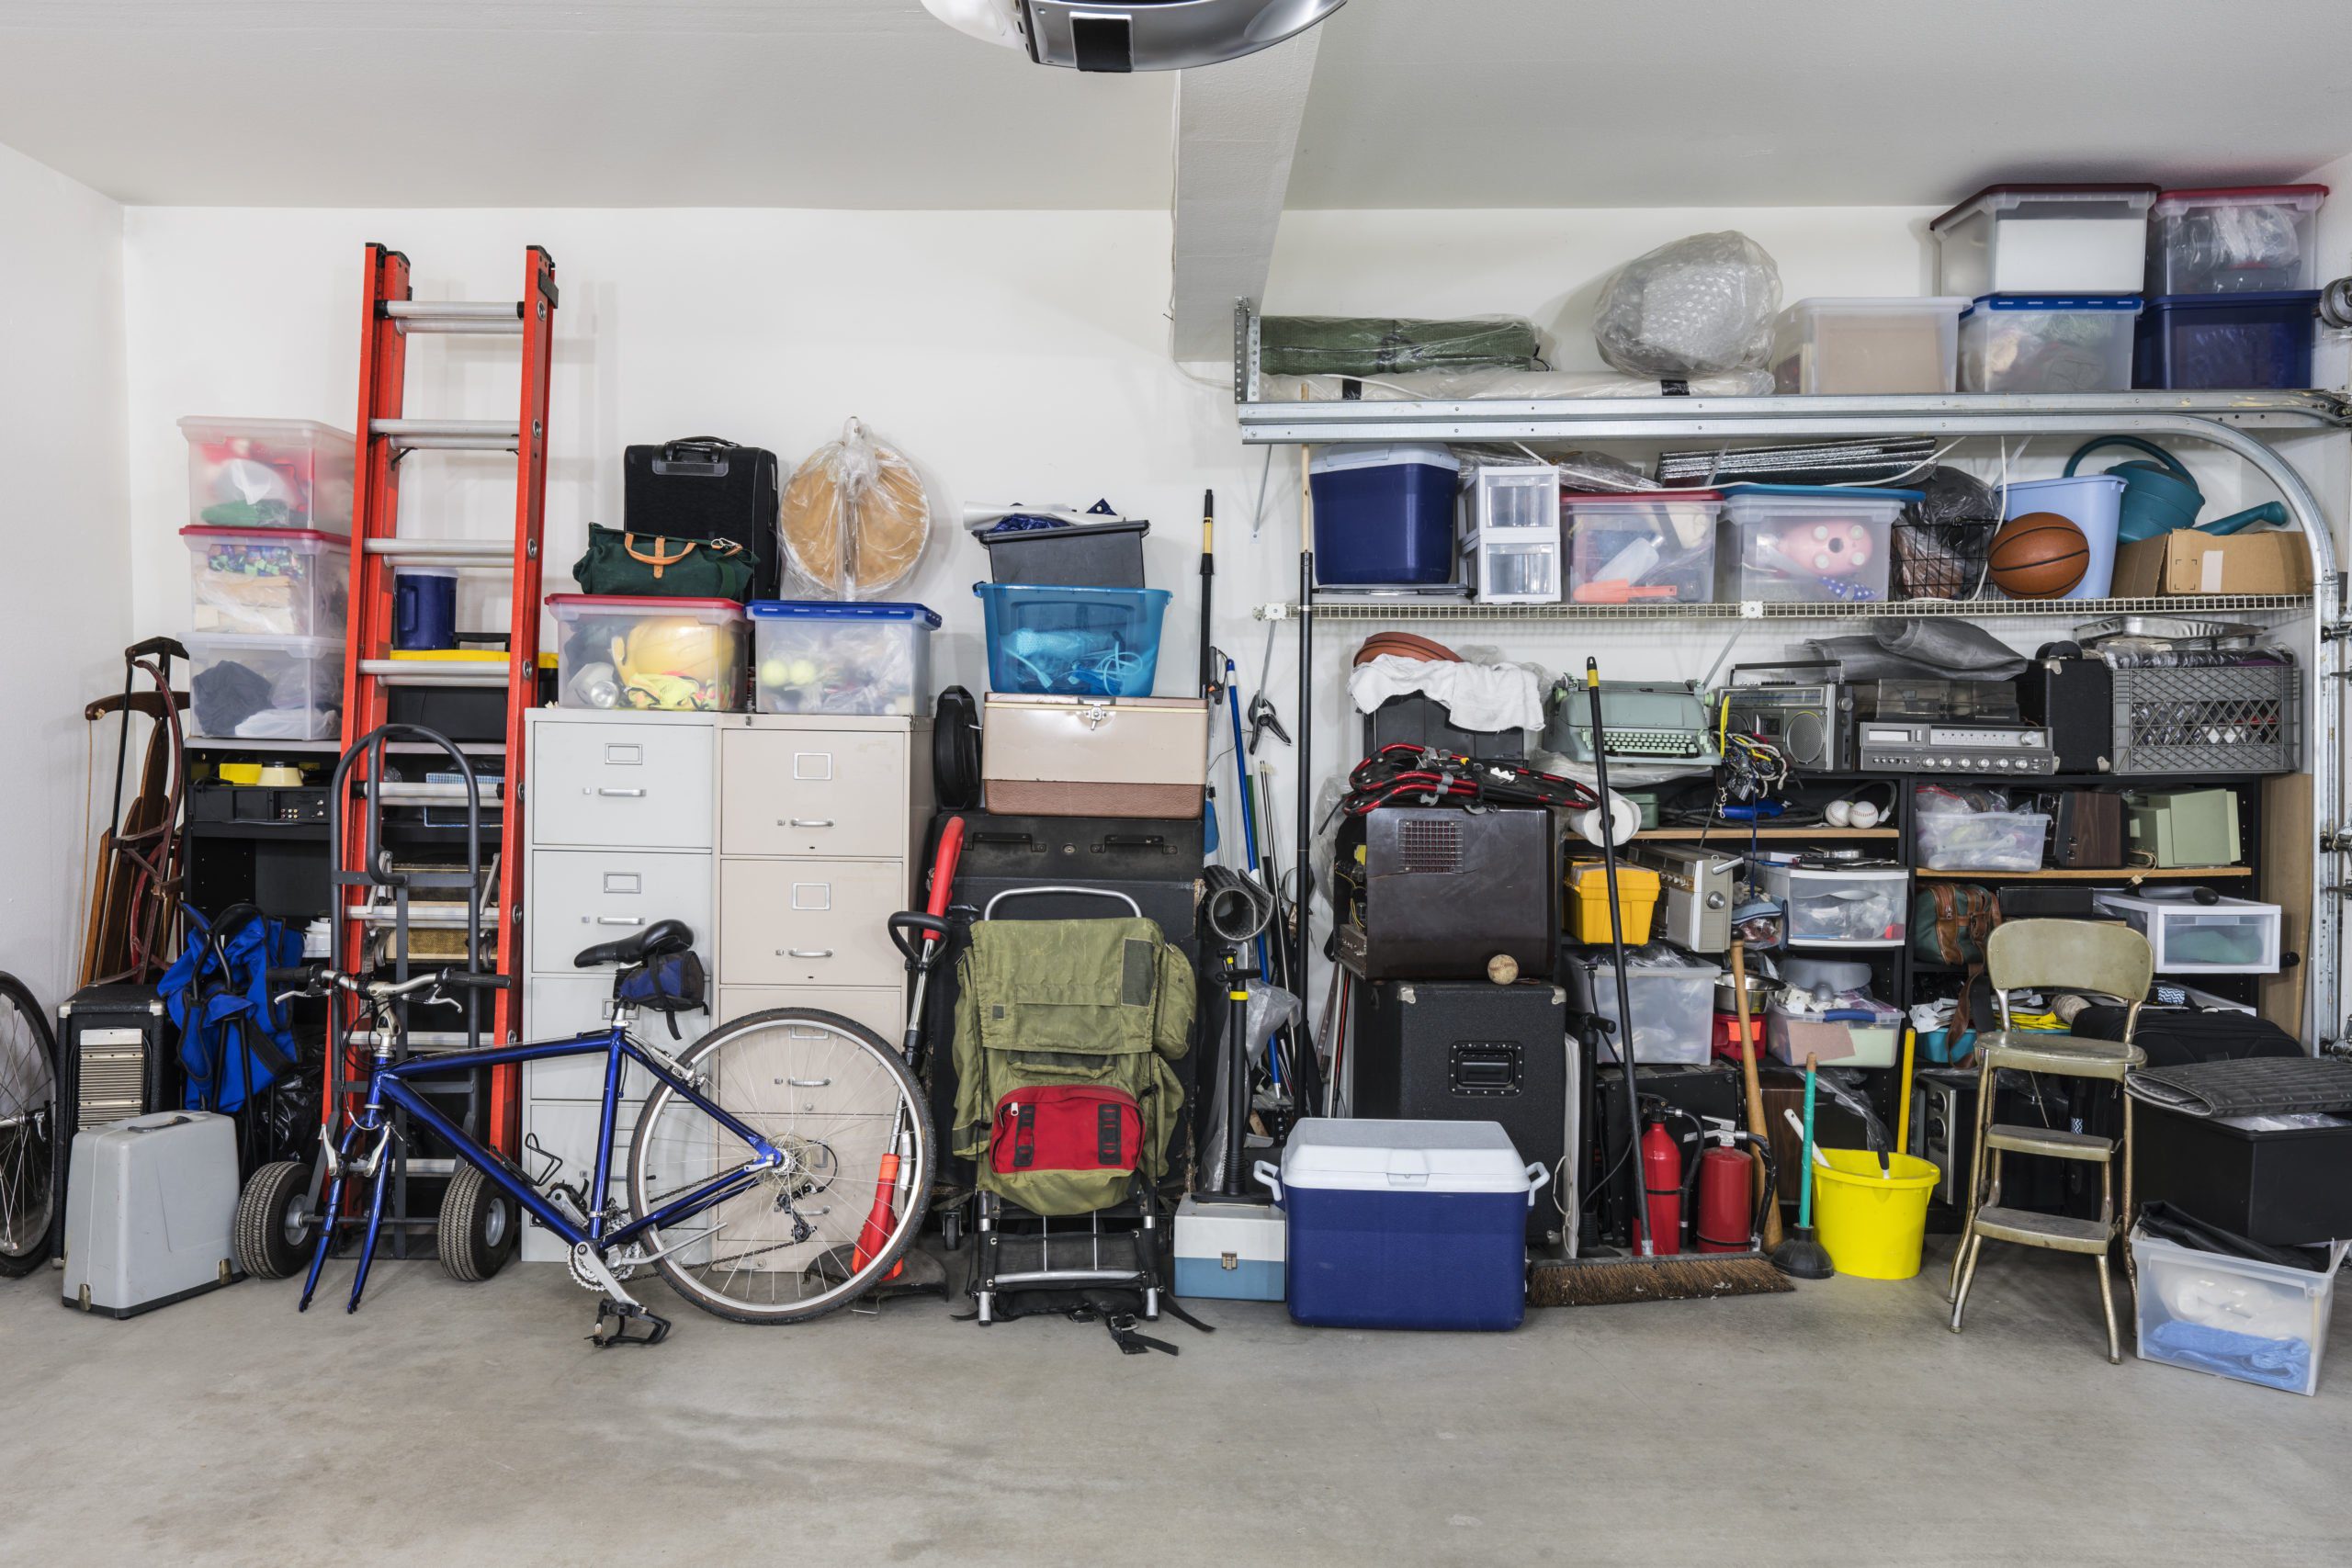 Garage storage shelves with vintage objects and equipment.